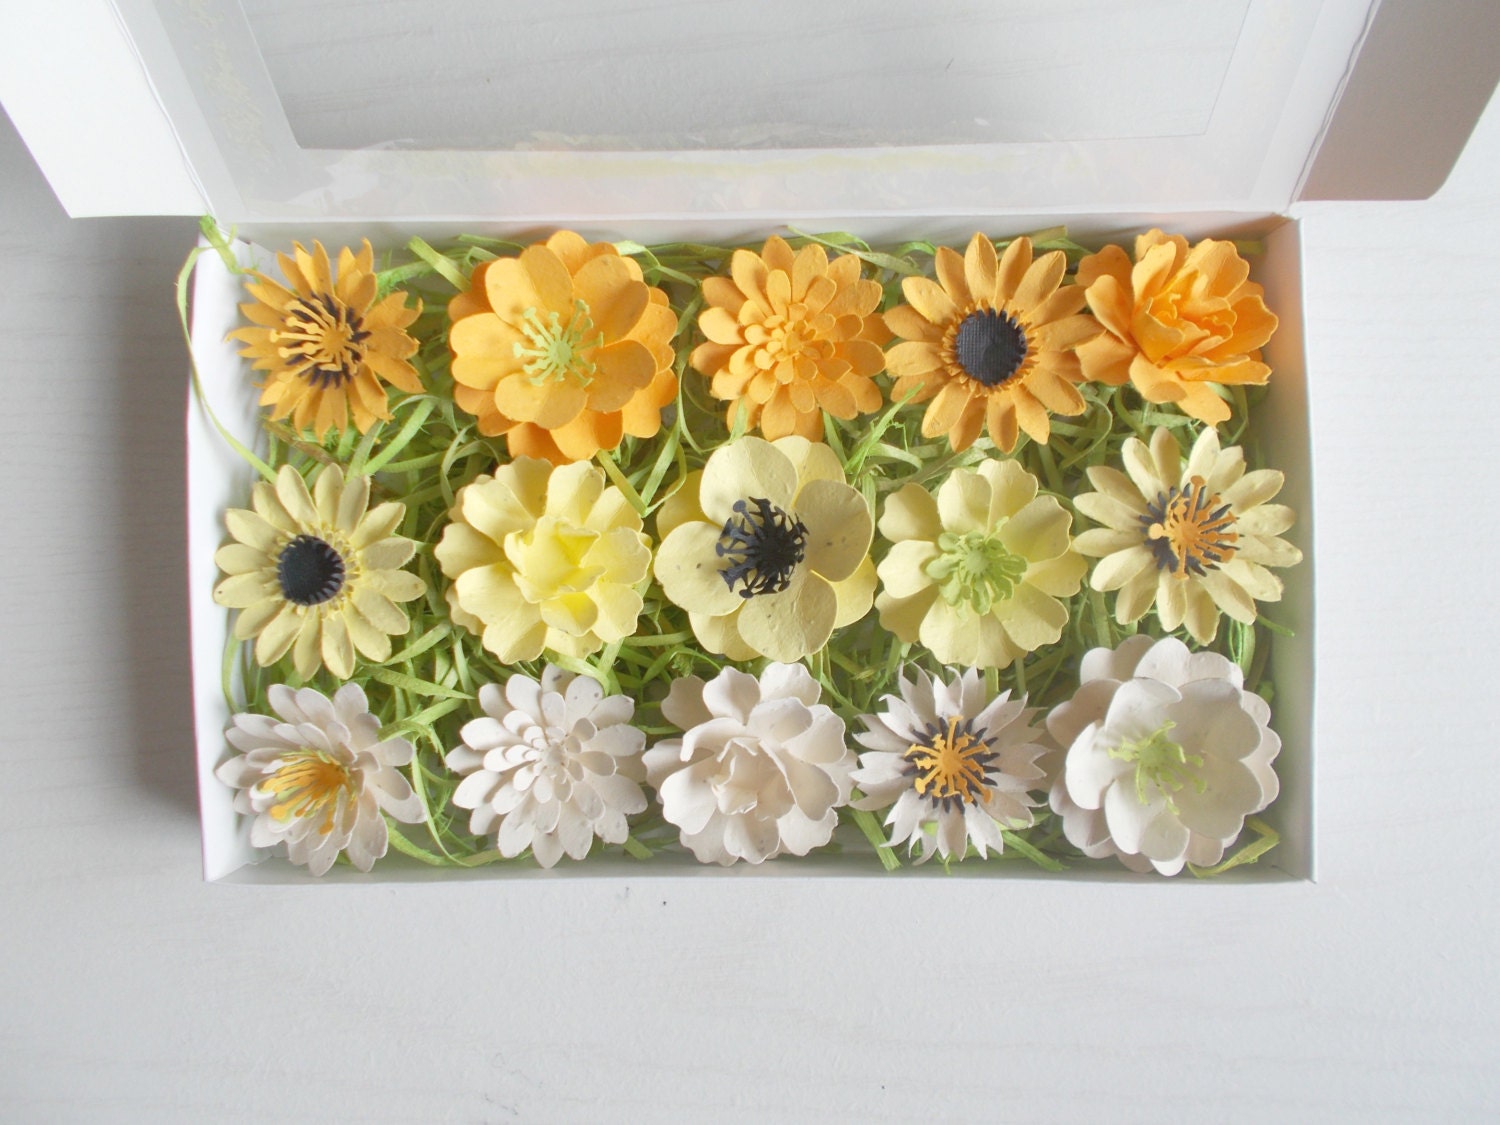 Yellow and Cream Paper Flowers - Seeded Paper Favors - Unique Gift Set Made With Plantable Paper Embedded with Flower Seeds - Plant and Grow